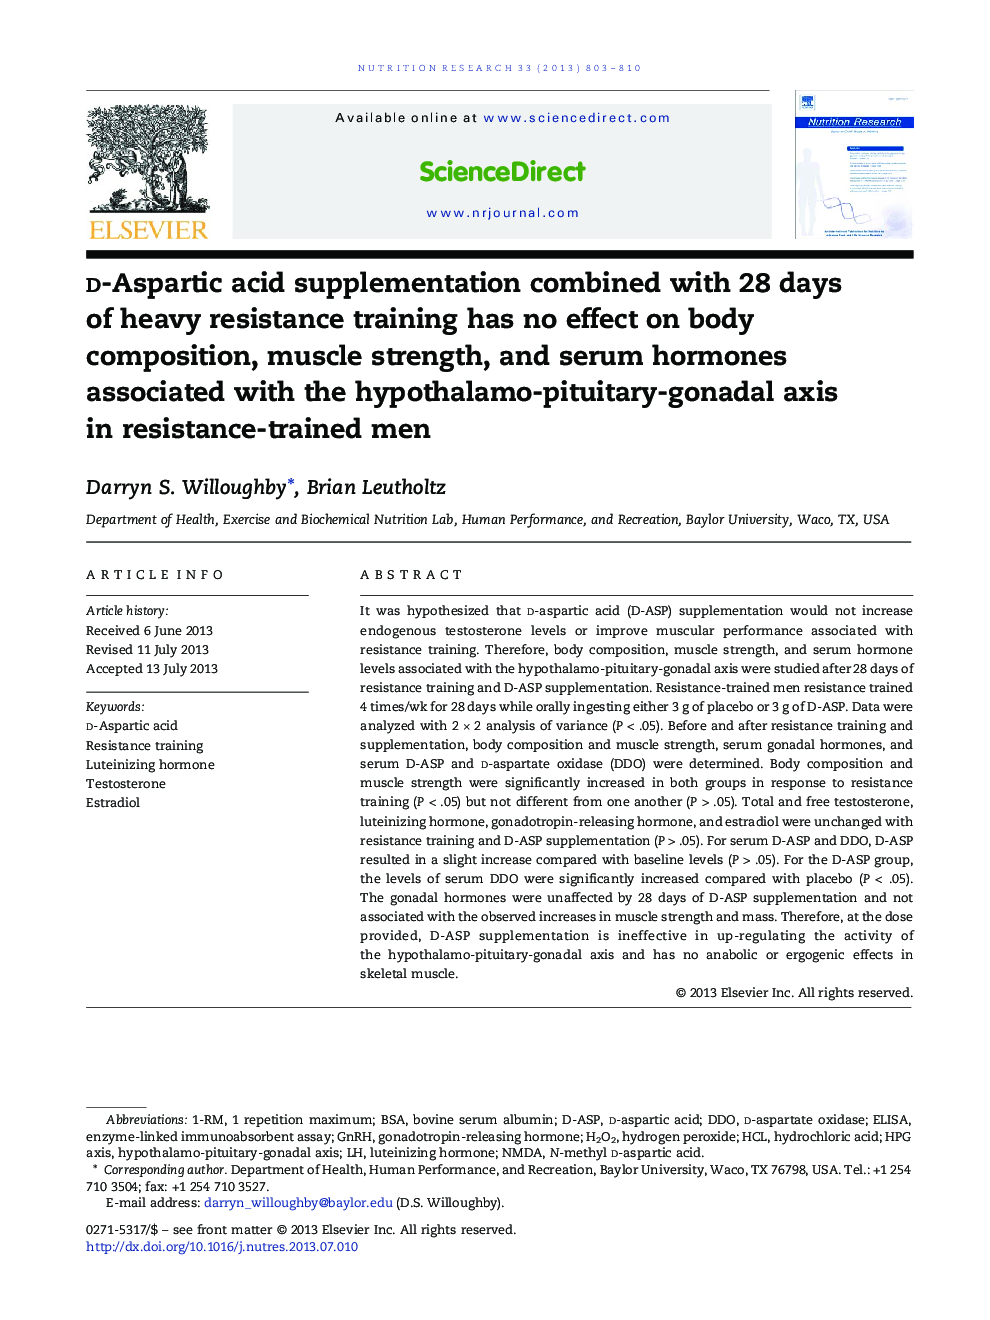 d-Aspartic acid supplementation combined with 28 days of heavy resistance training has no effect on body composition, muscle strength, and serum hormones associated with the hypothalamo-pituitary-gonadal axis in resistance-trained men